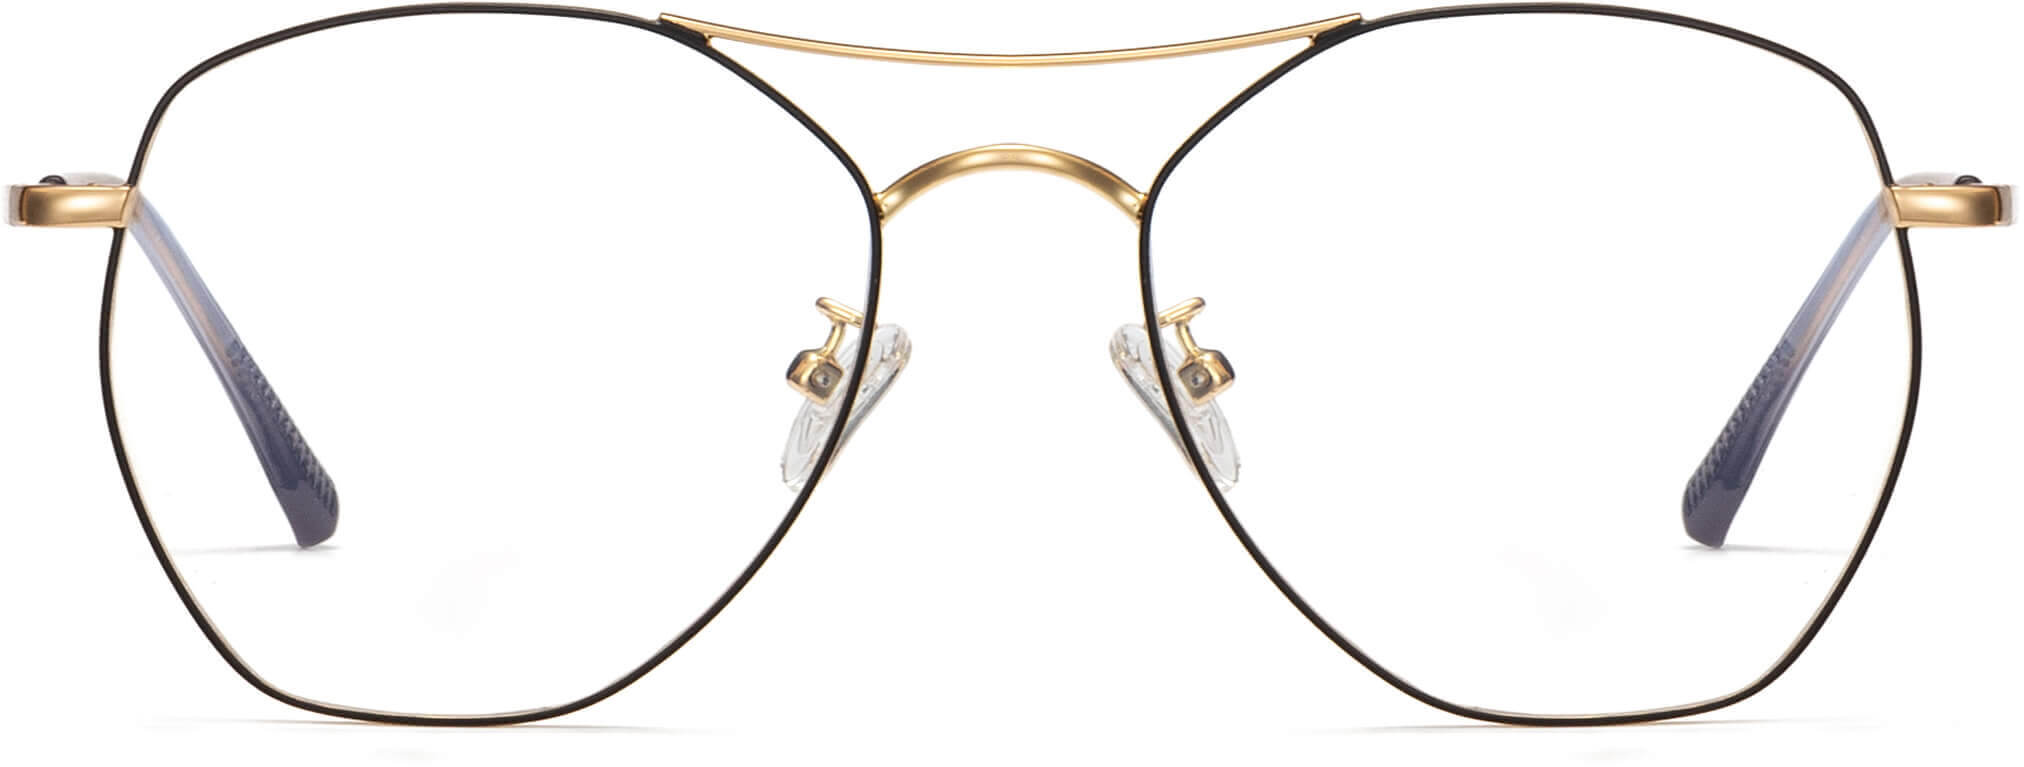 Avery Golden Metal Eyeglasses from ANRRI, Front View